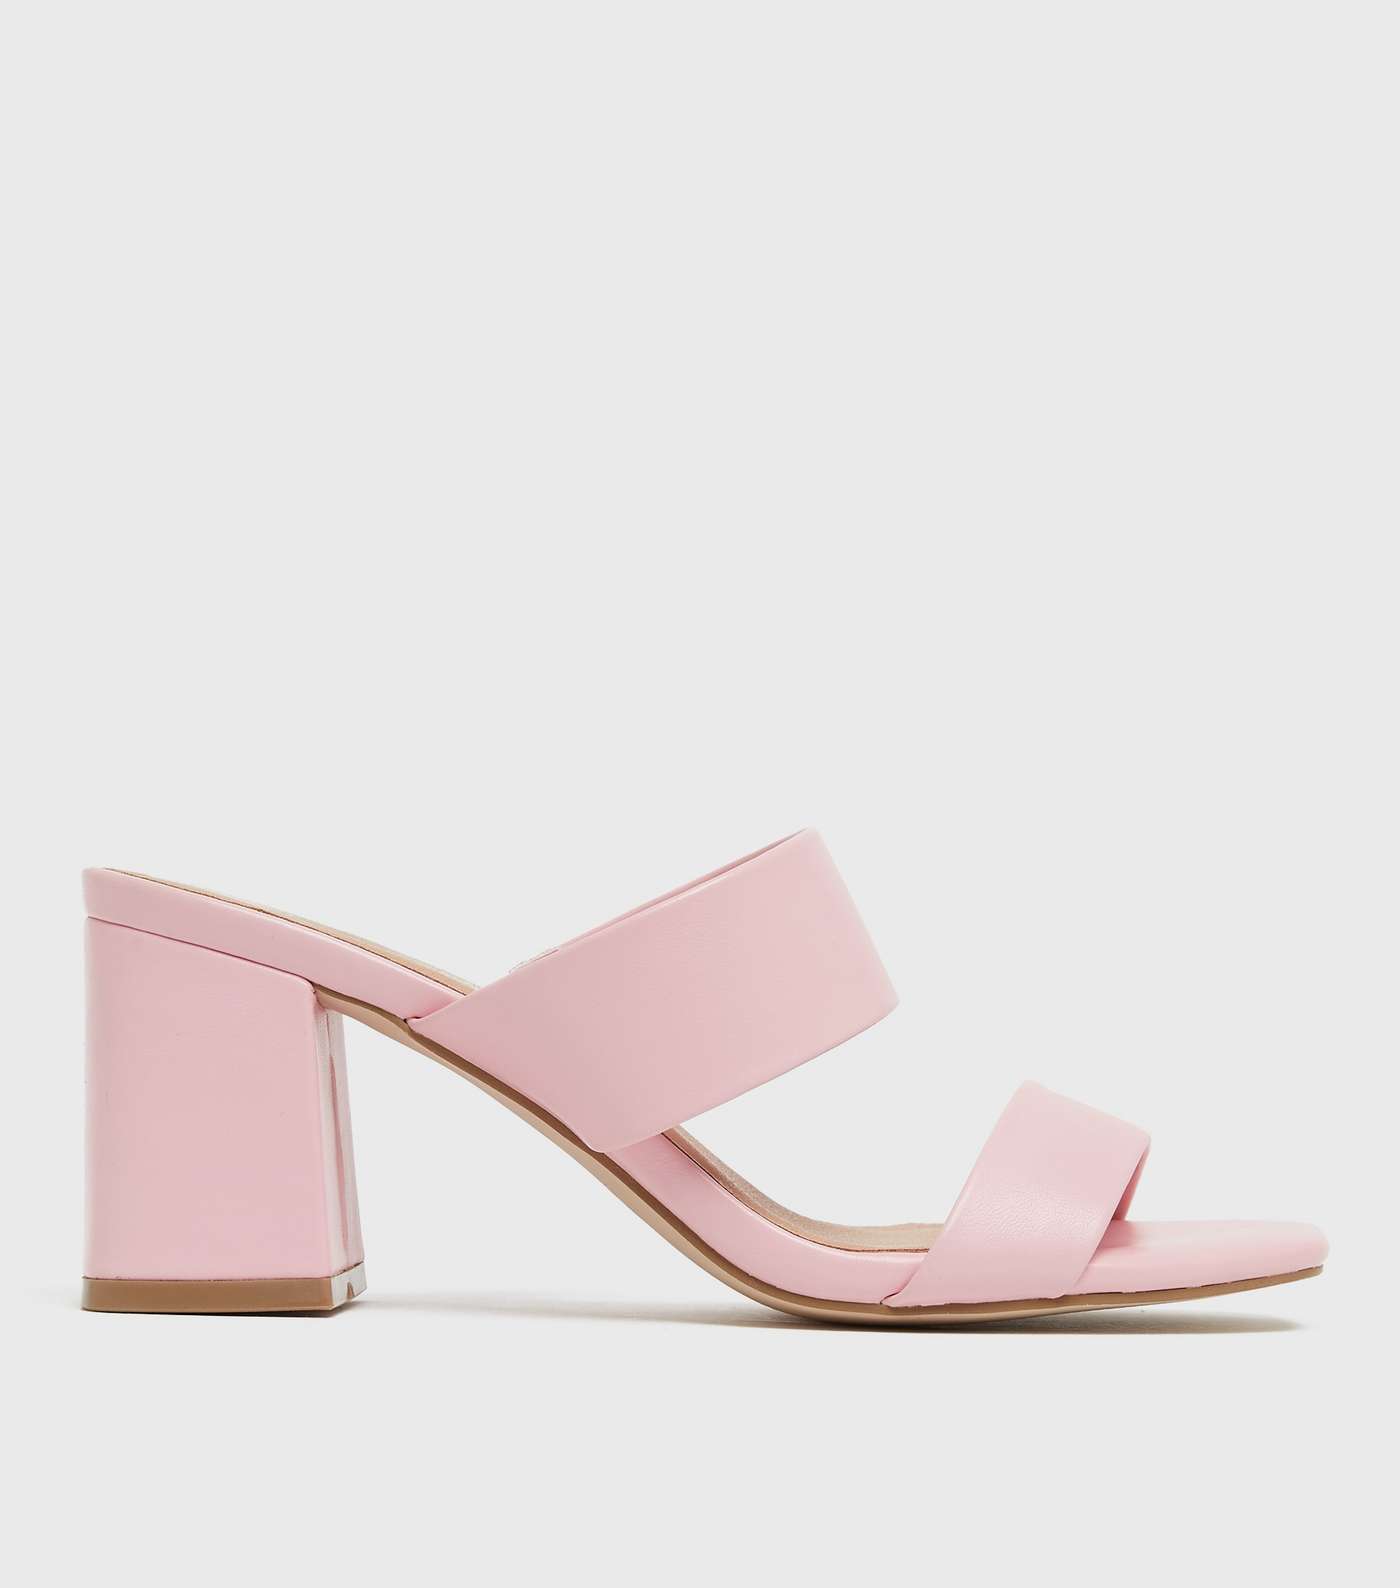 Wide Fit Pink Double Strap Block Heel Mules